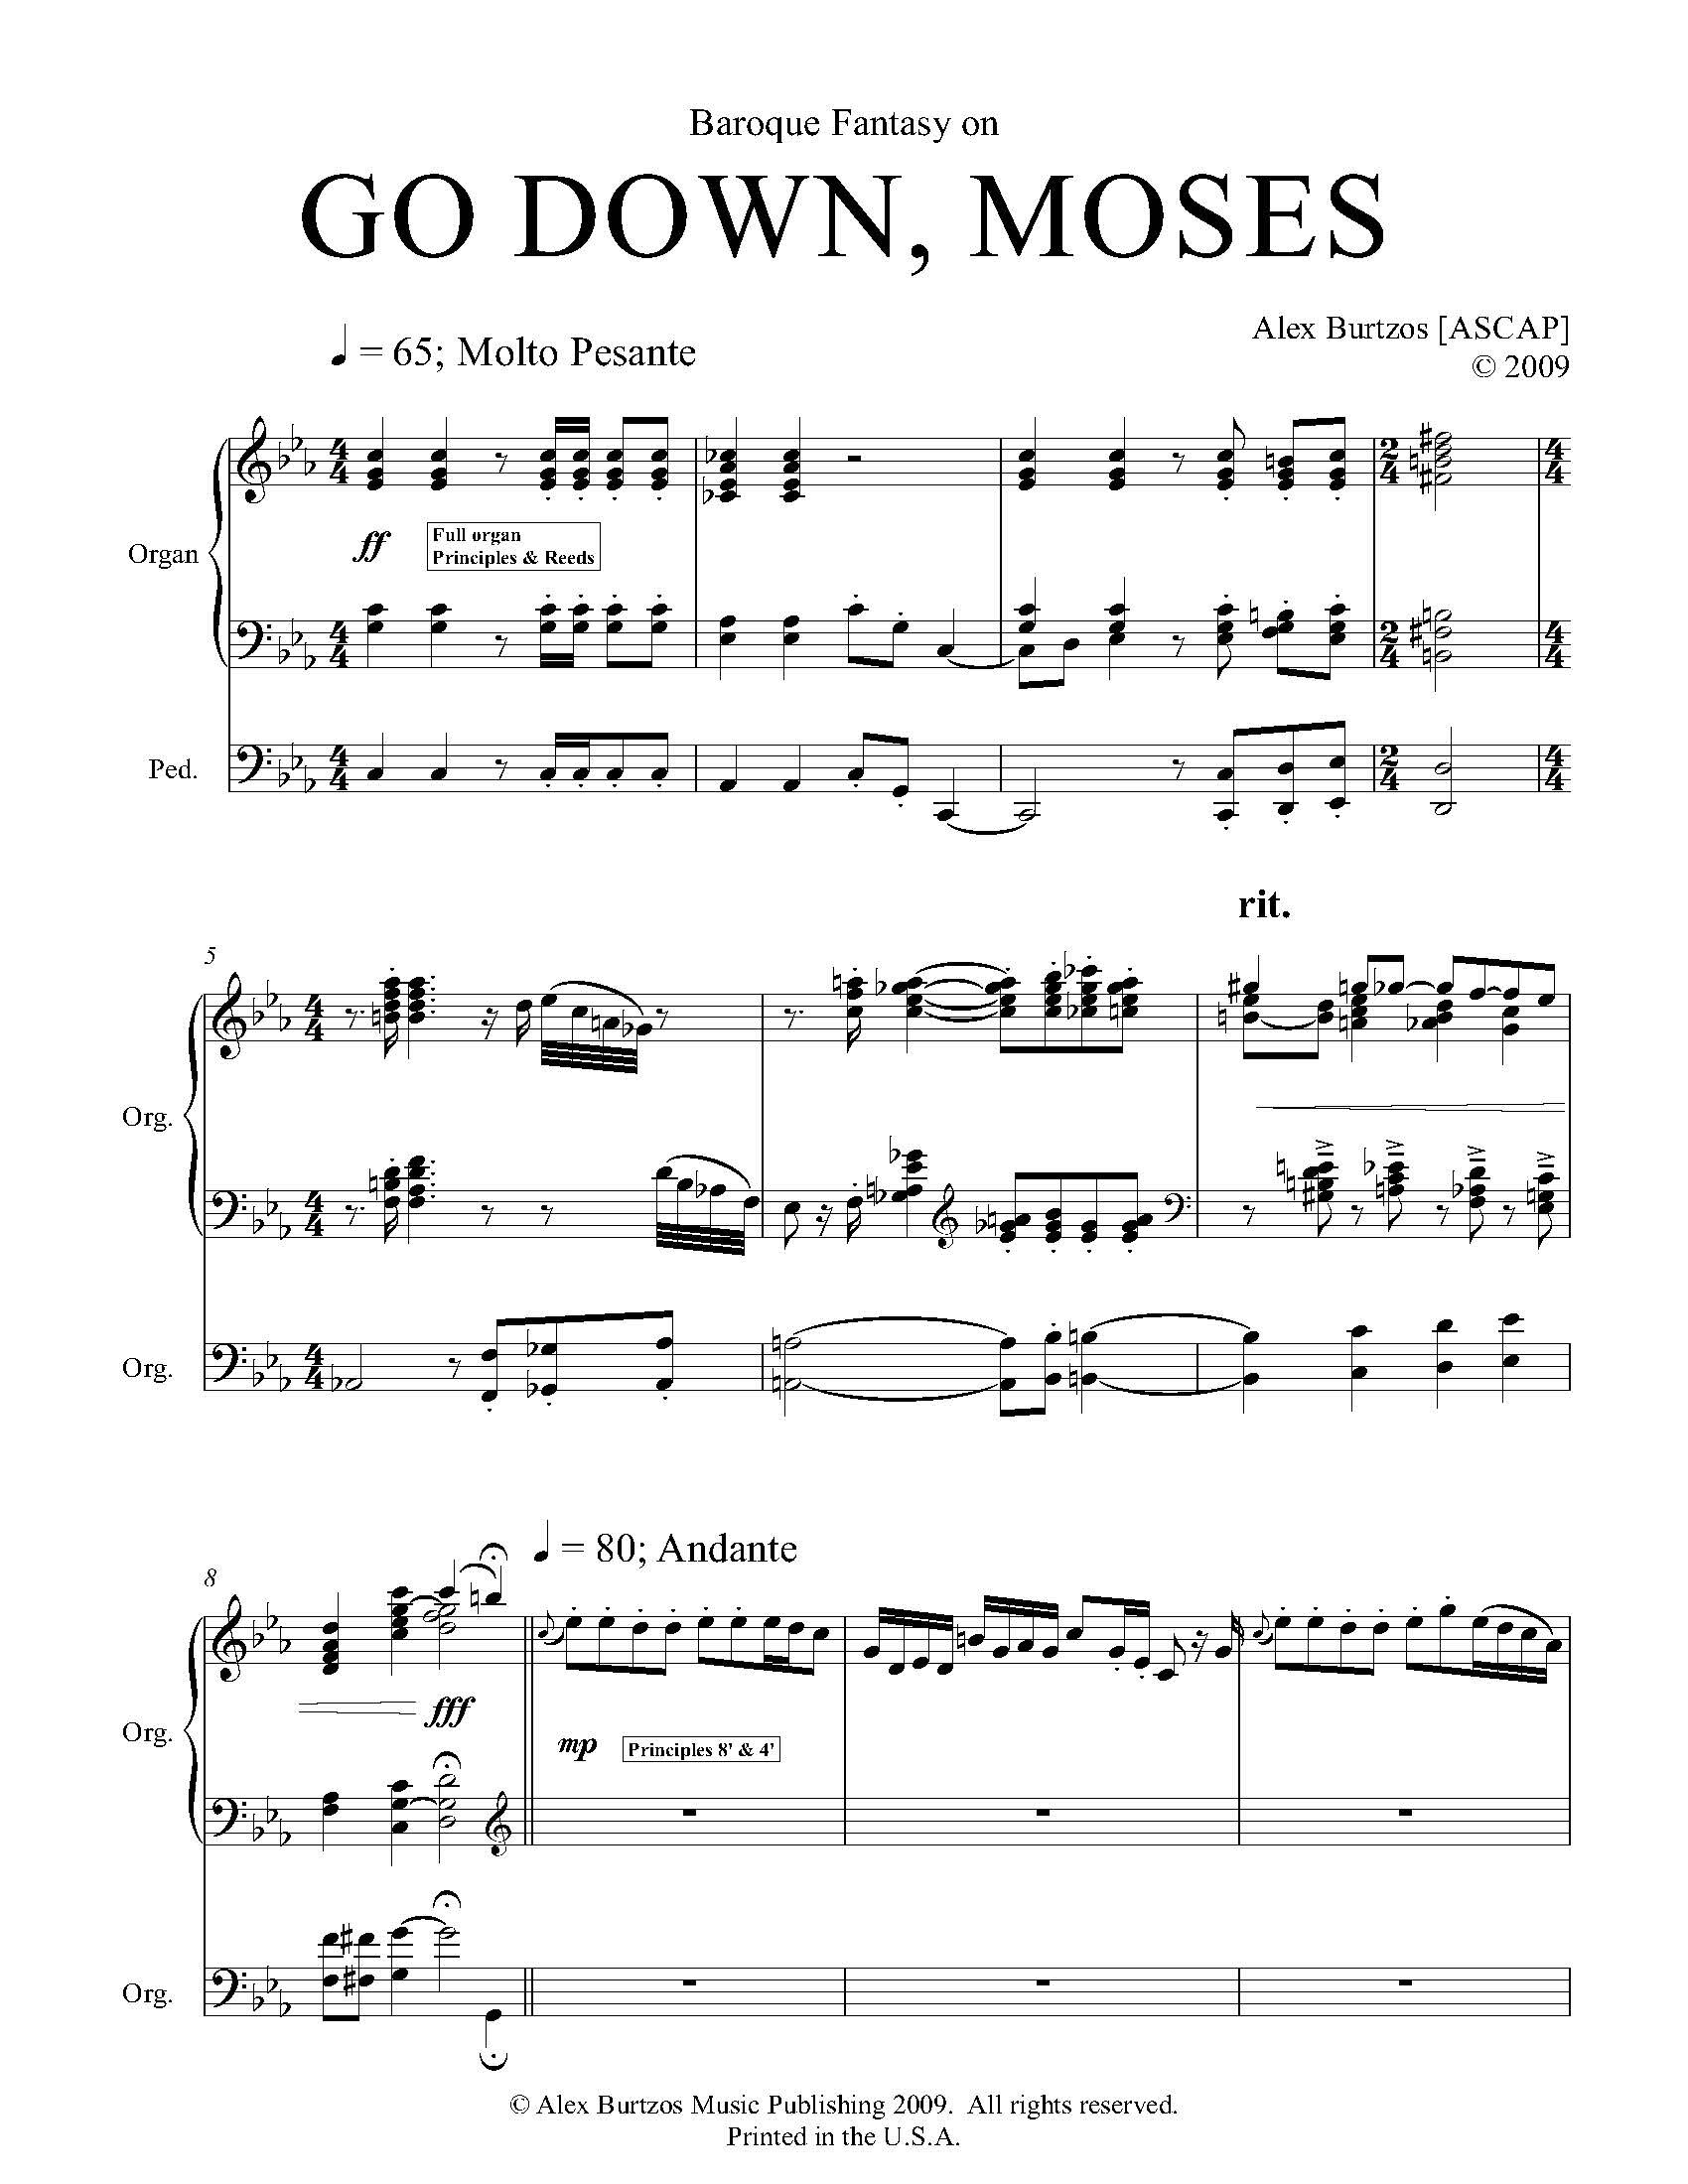 Baroque Fantasy on Go Down Moses - Complete Score_Page_07.jpg